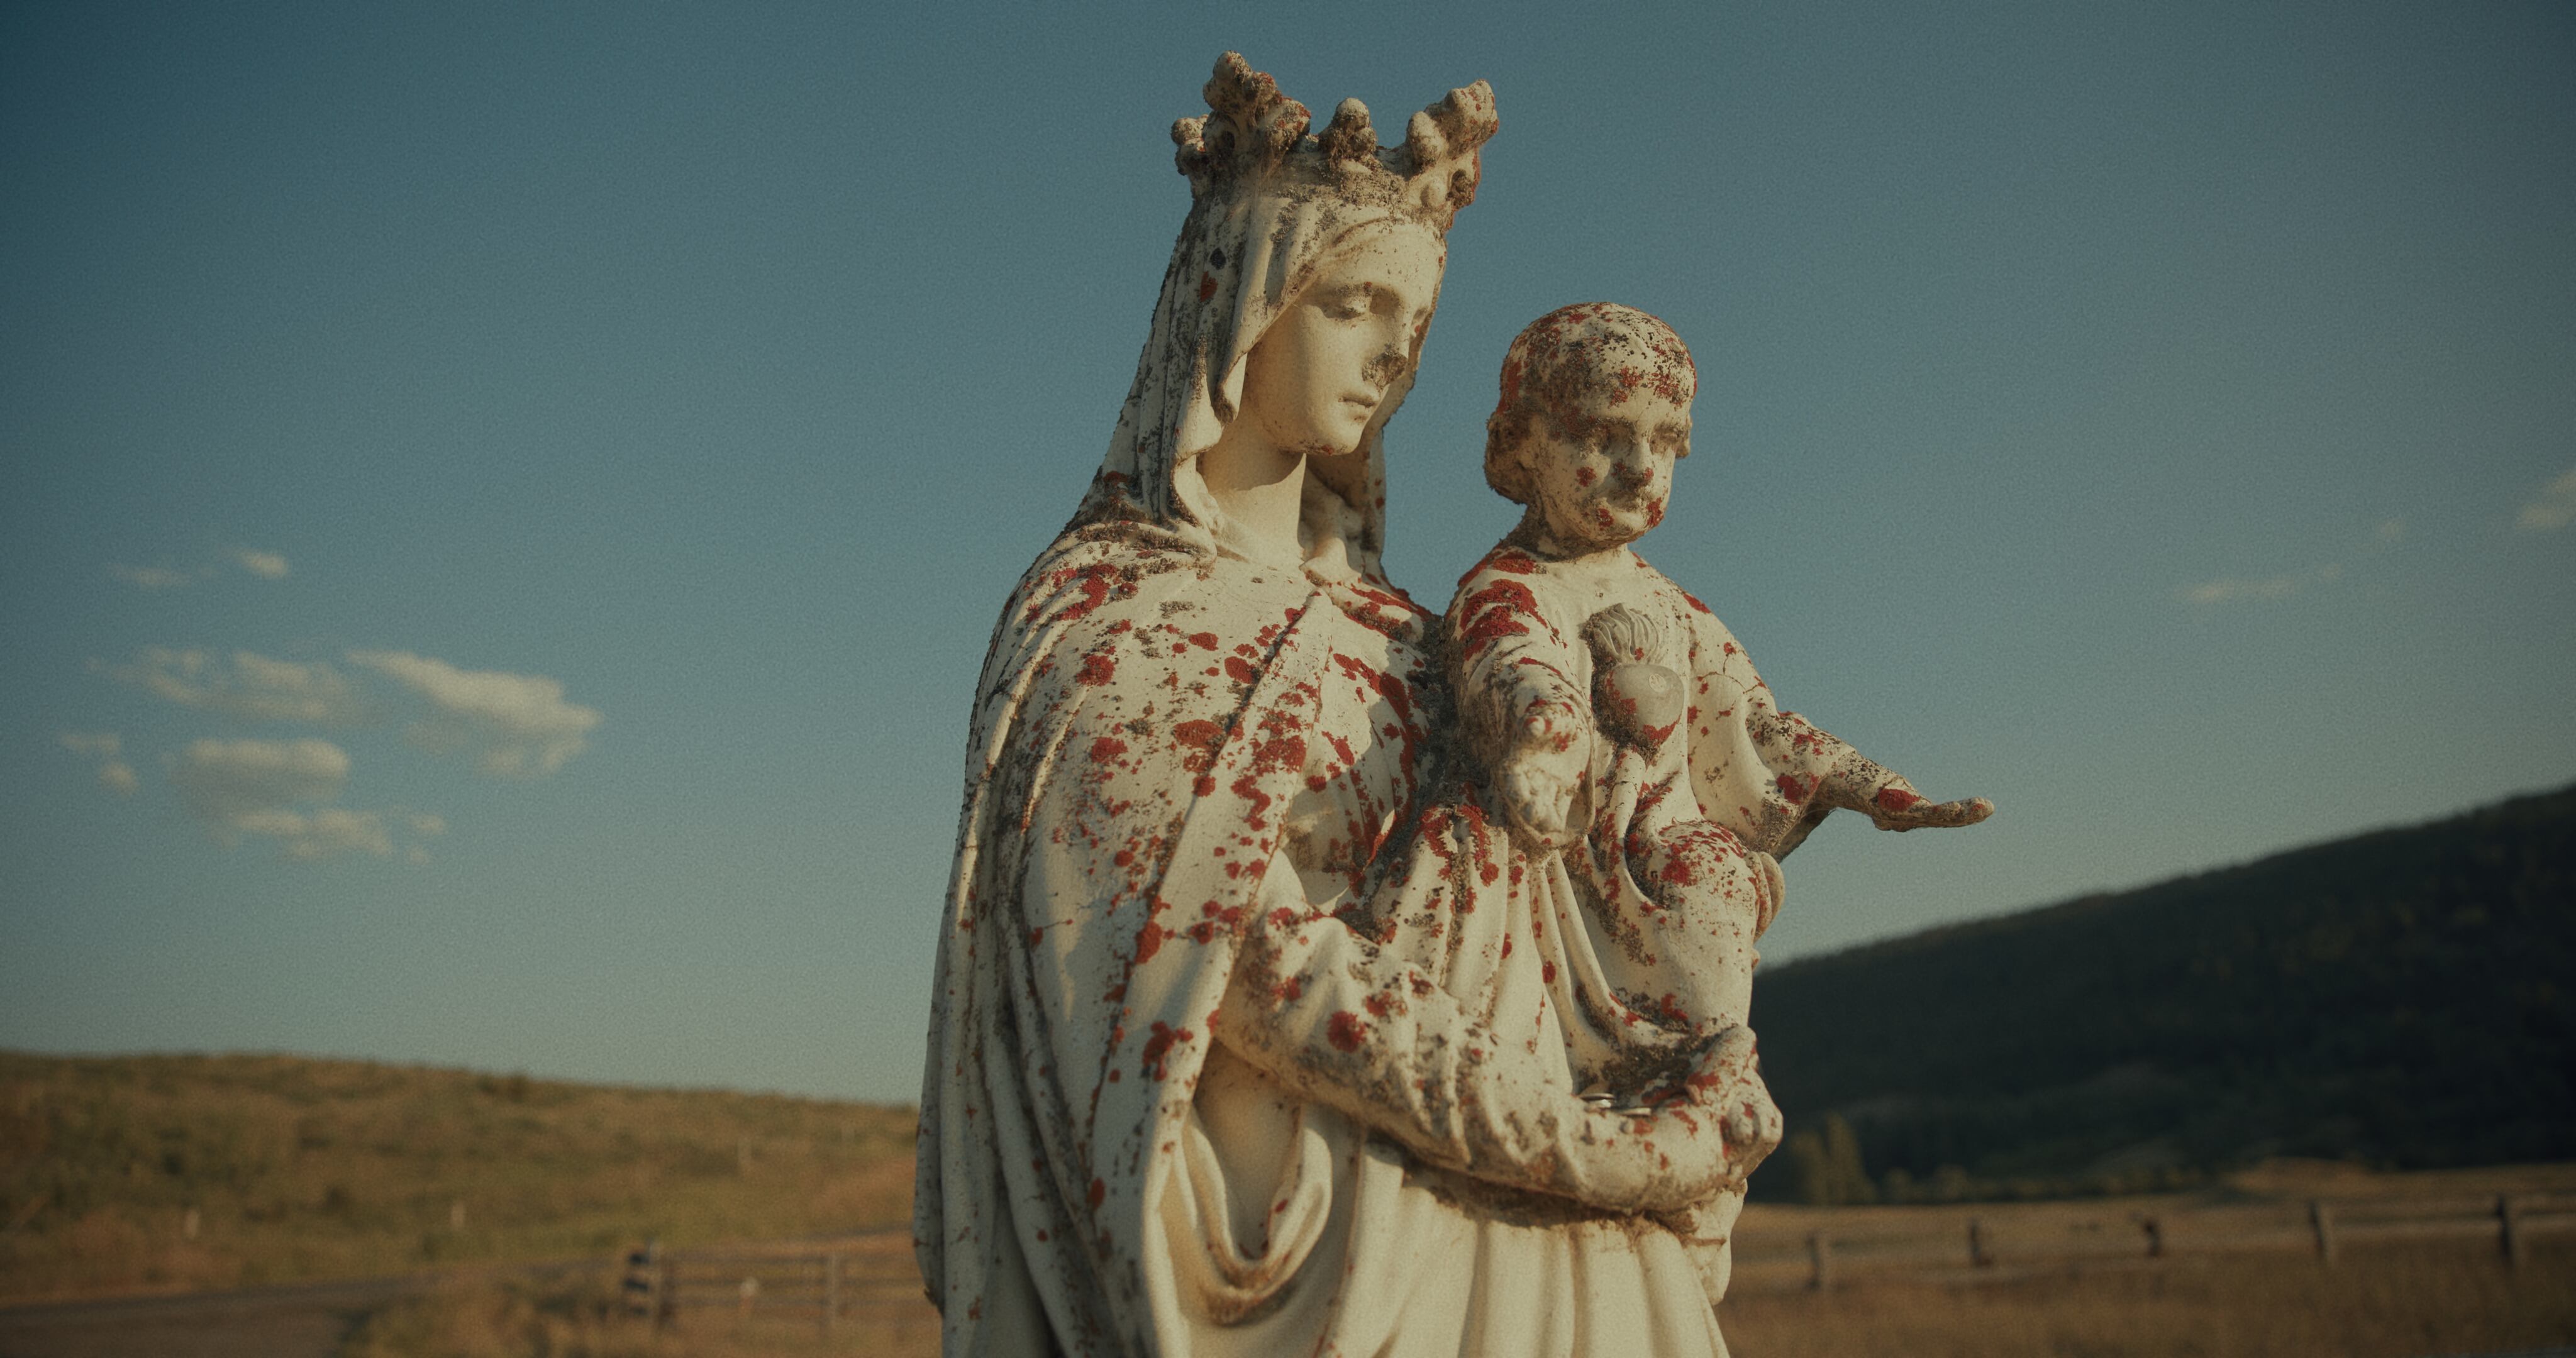 (Christopher LaMarca | Sugarcane Film LLC) A statue of Mary and Baby Jesus looks over St. Joseph's Mission, a former Indian residential school near Williams Lake, British Columbia, where a search for unmarked graves of former students is underway.